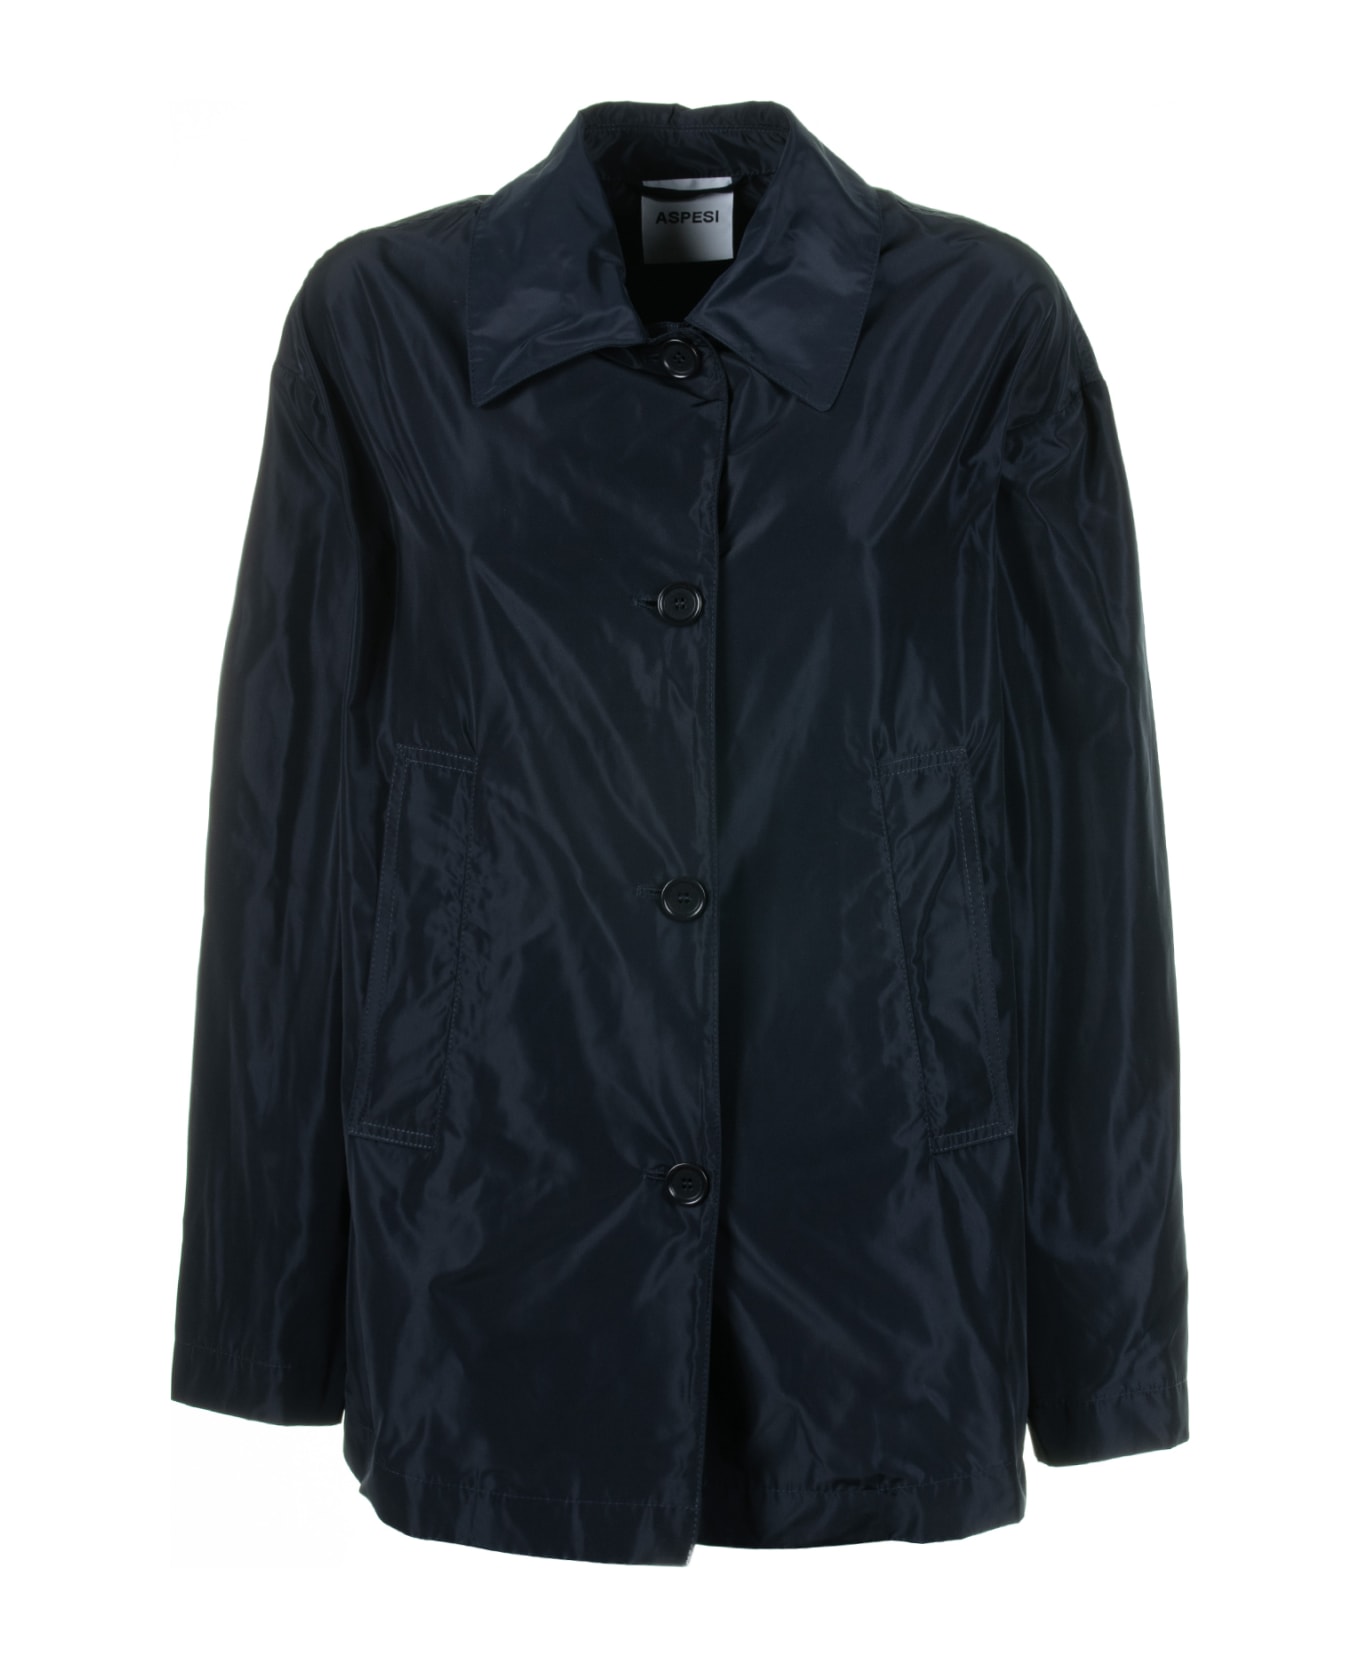 Aspesi Navy Blue Jacket With Buttons - NAVY